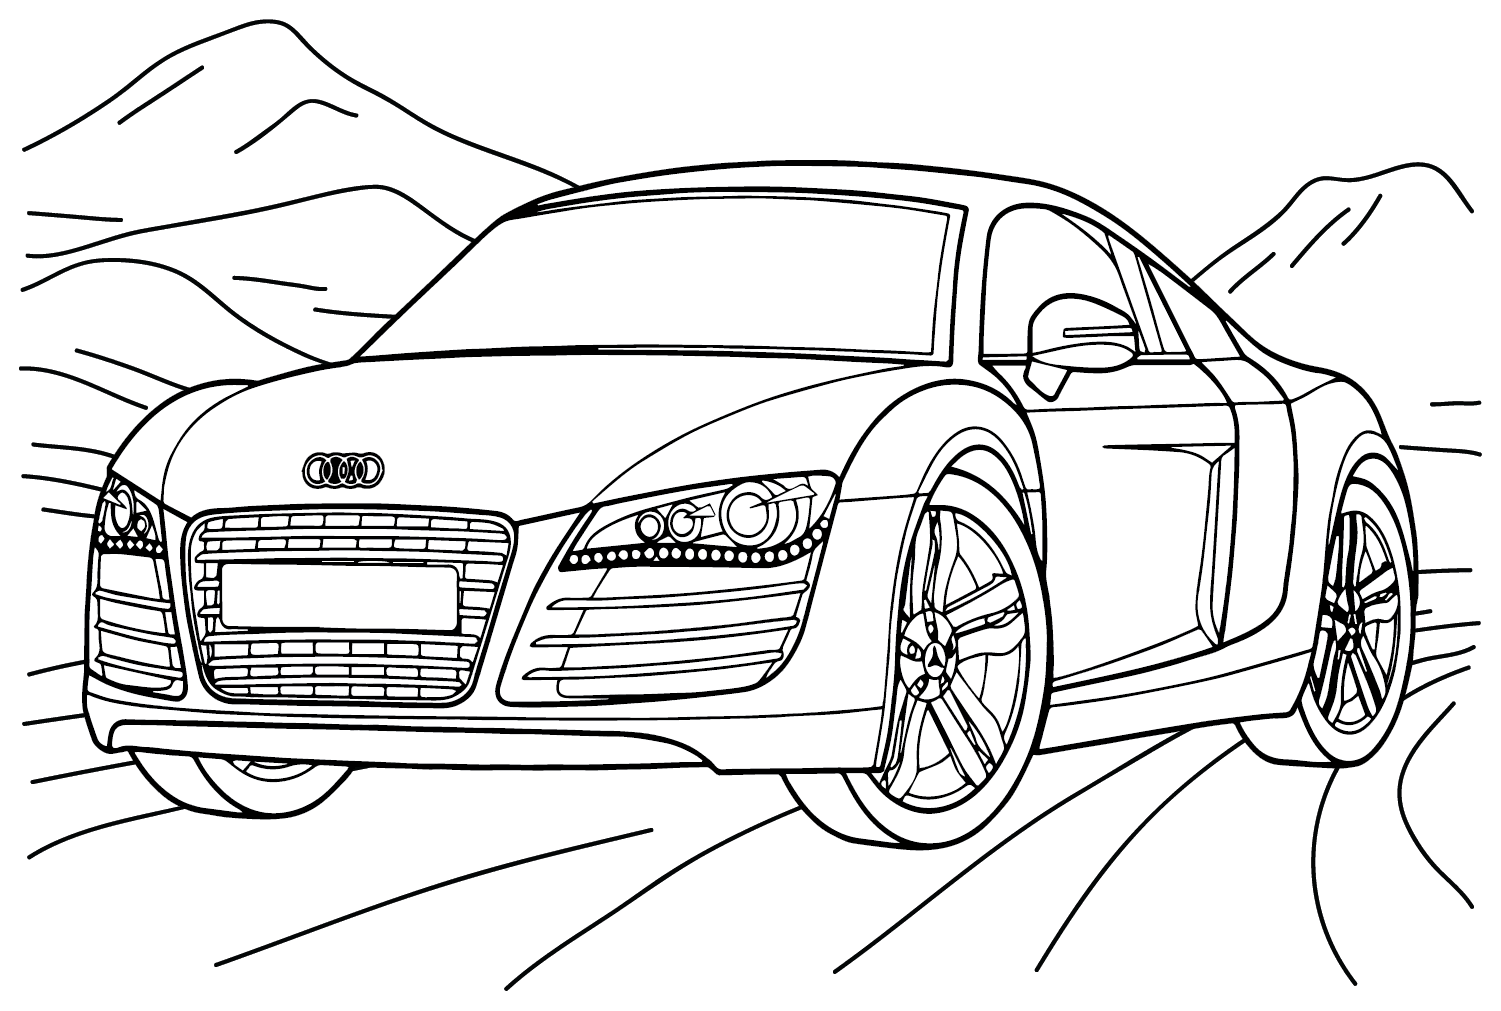 Audi R8 Coloring Page Images from Audi